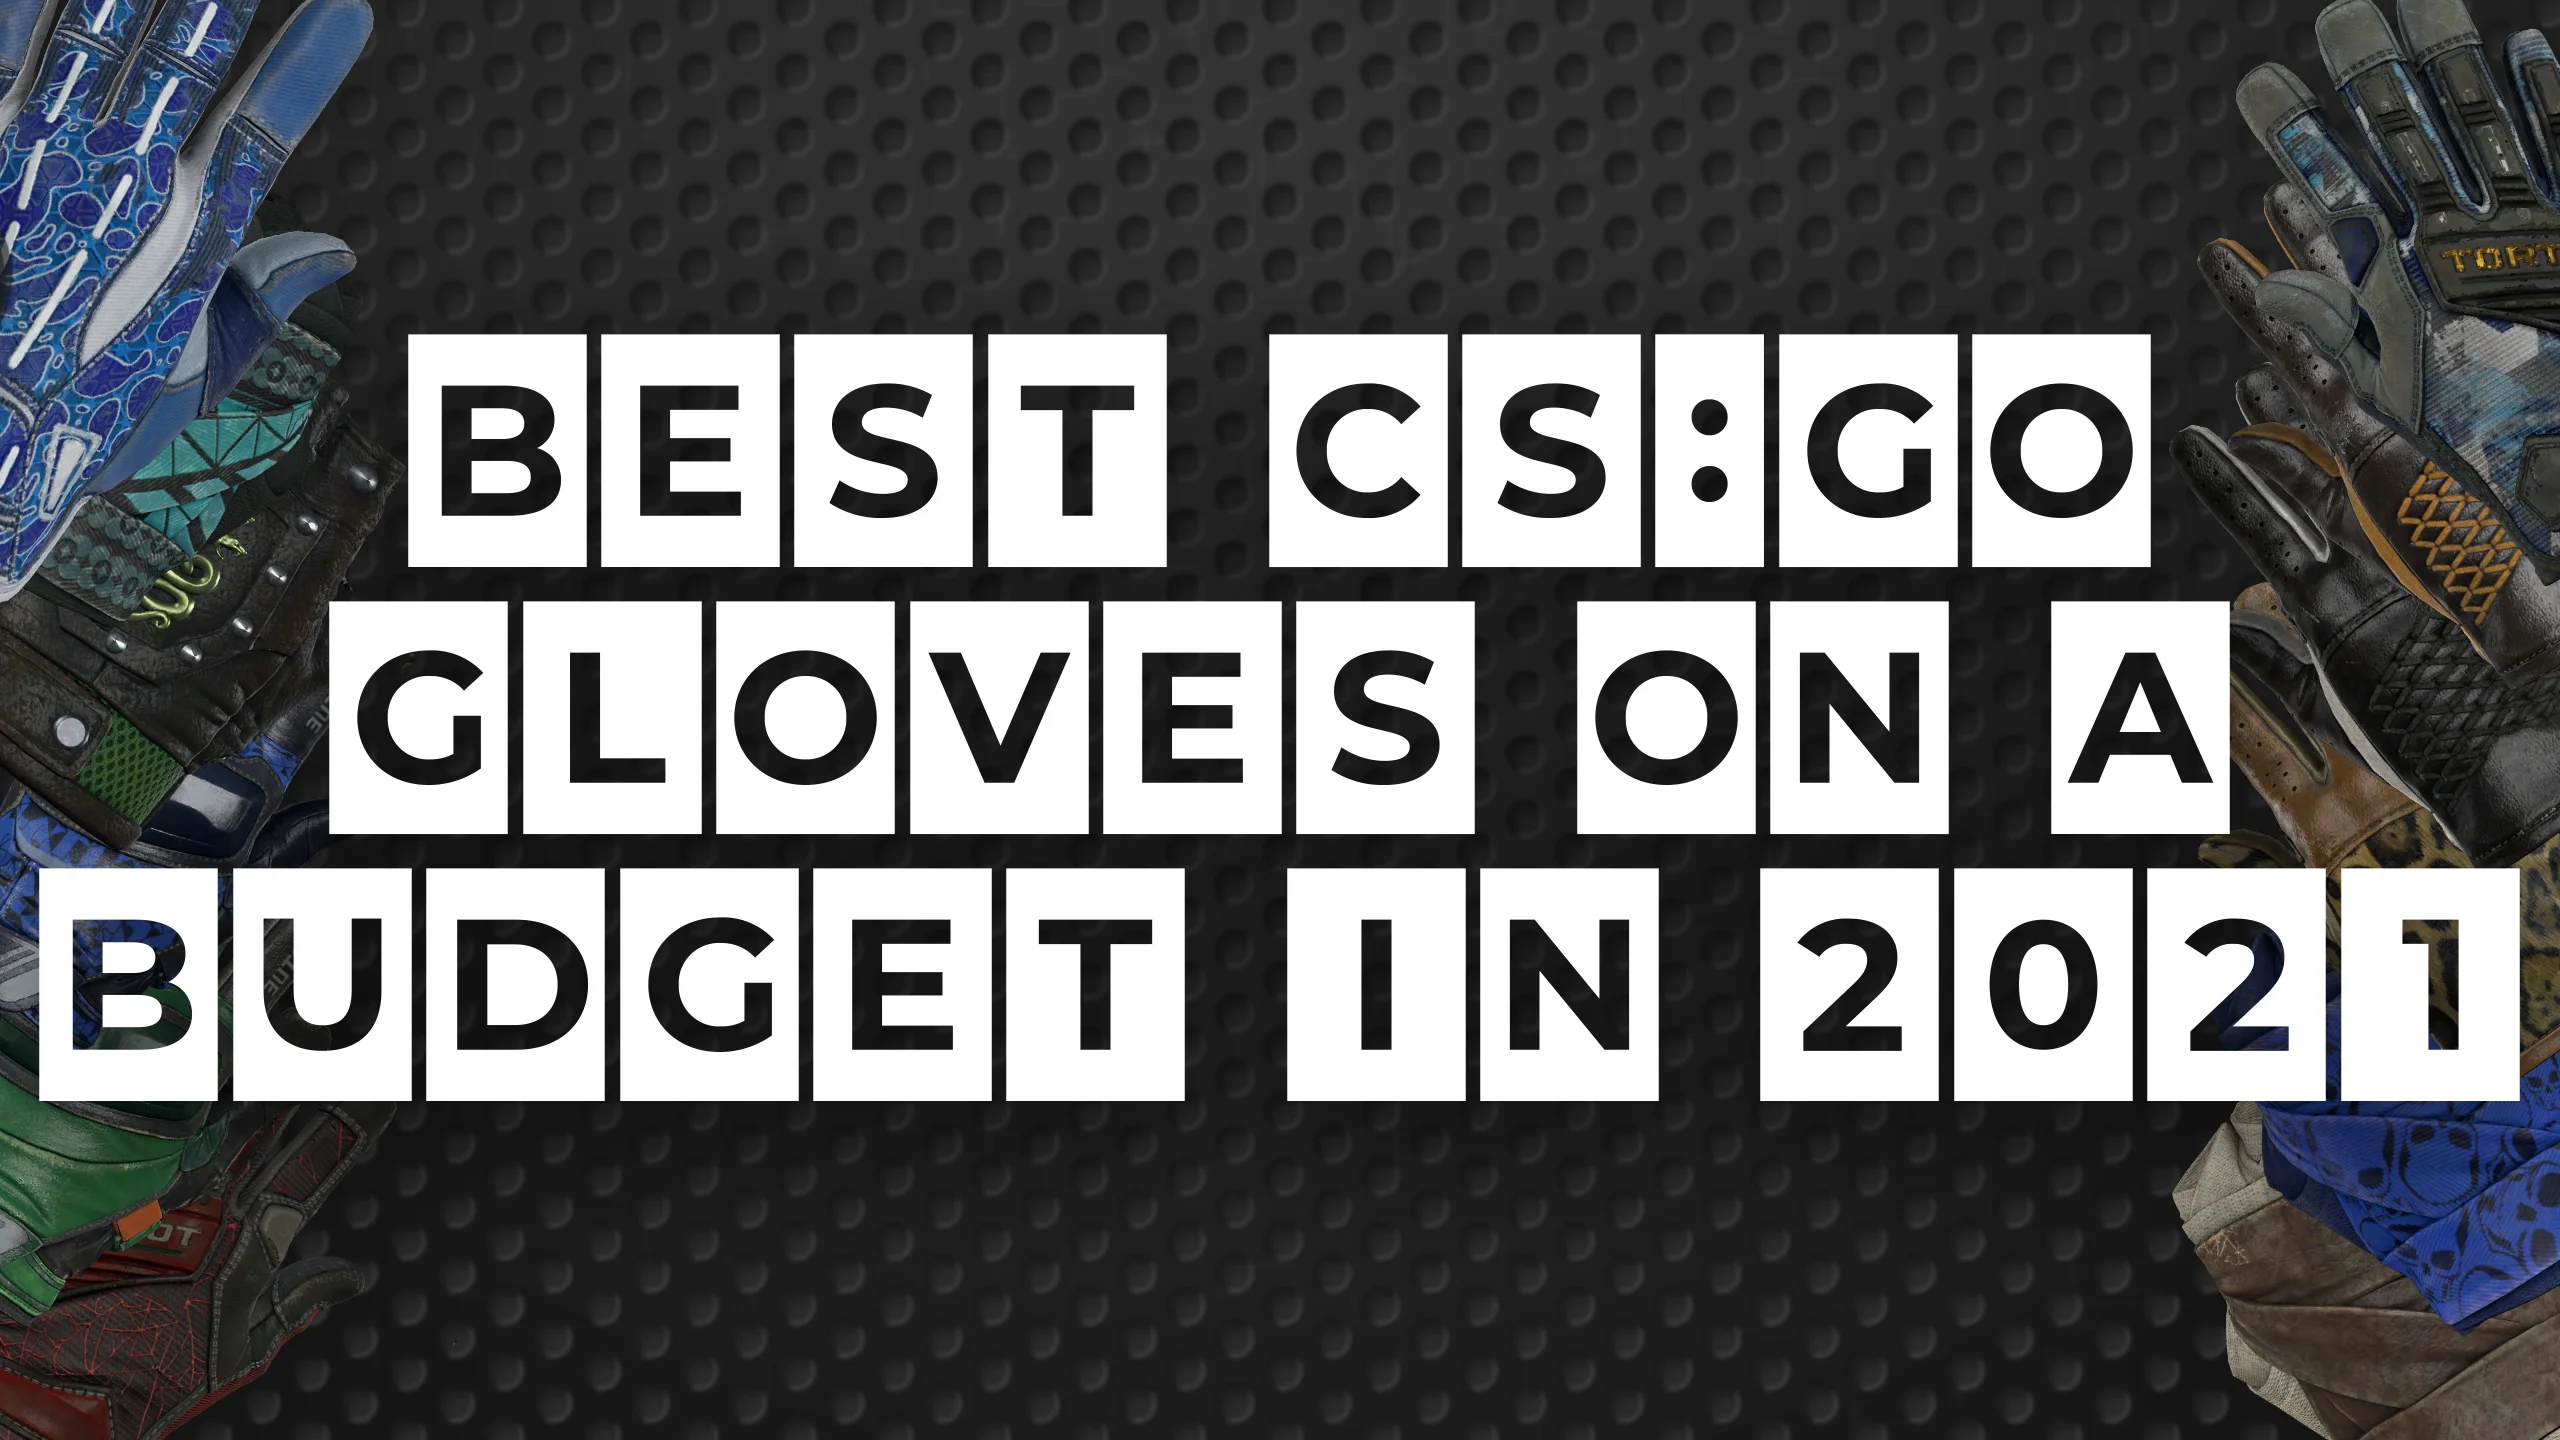 The Best CS:GO Gloves on a Budget in 2021